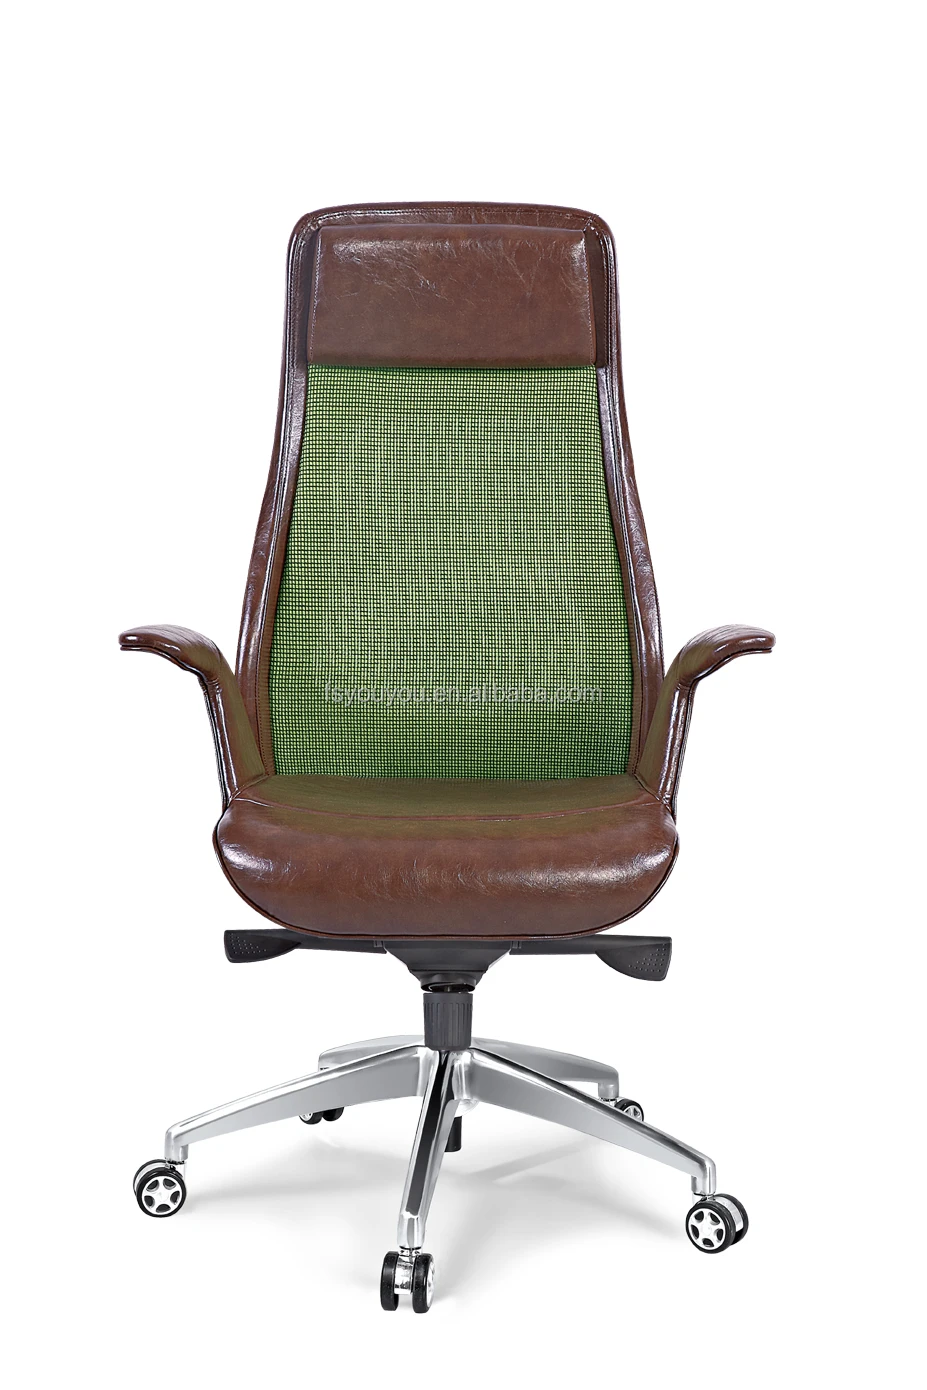 Black Leather With Mesh Office Chair Ergonomic Executive Upholstered